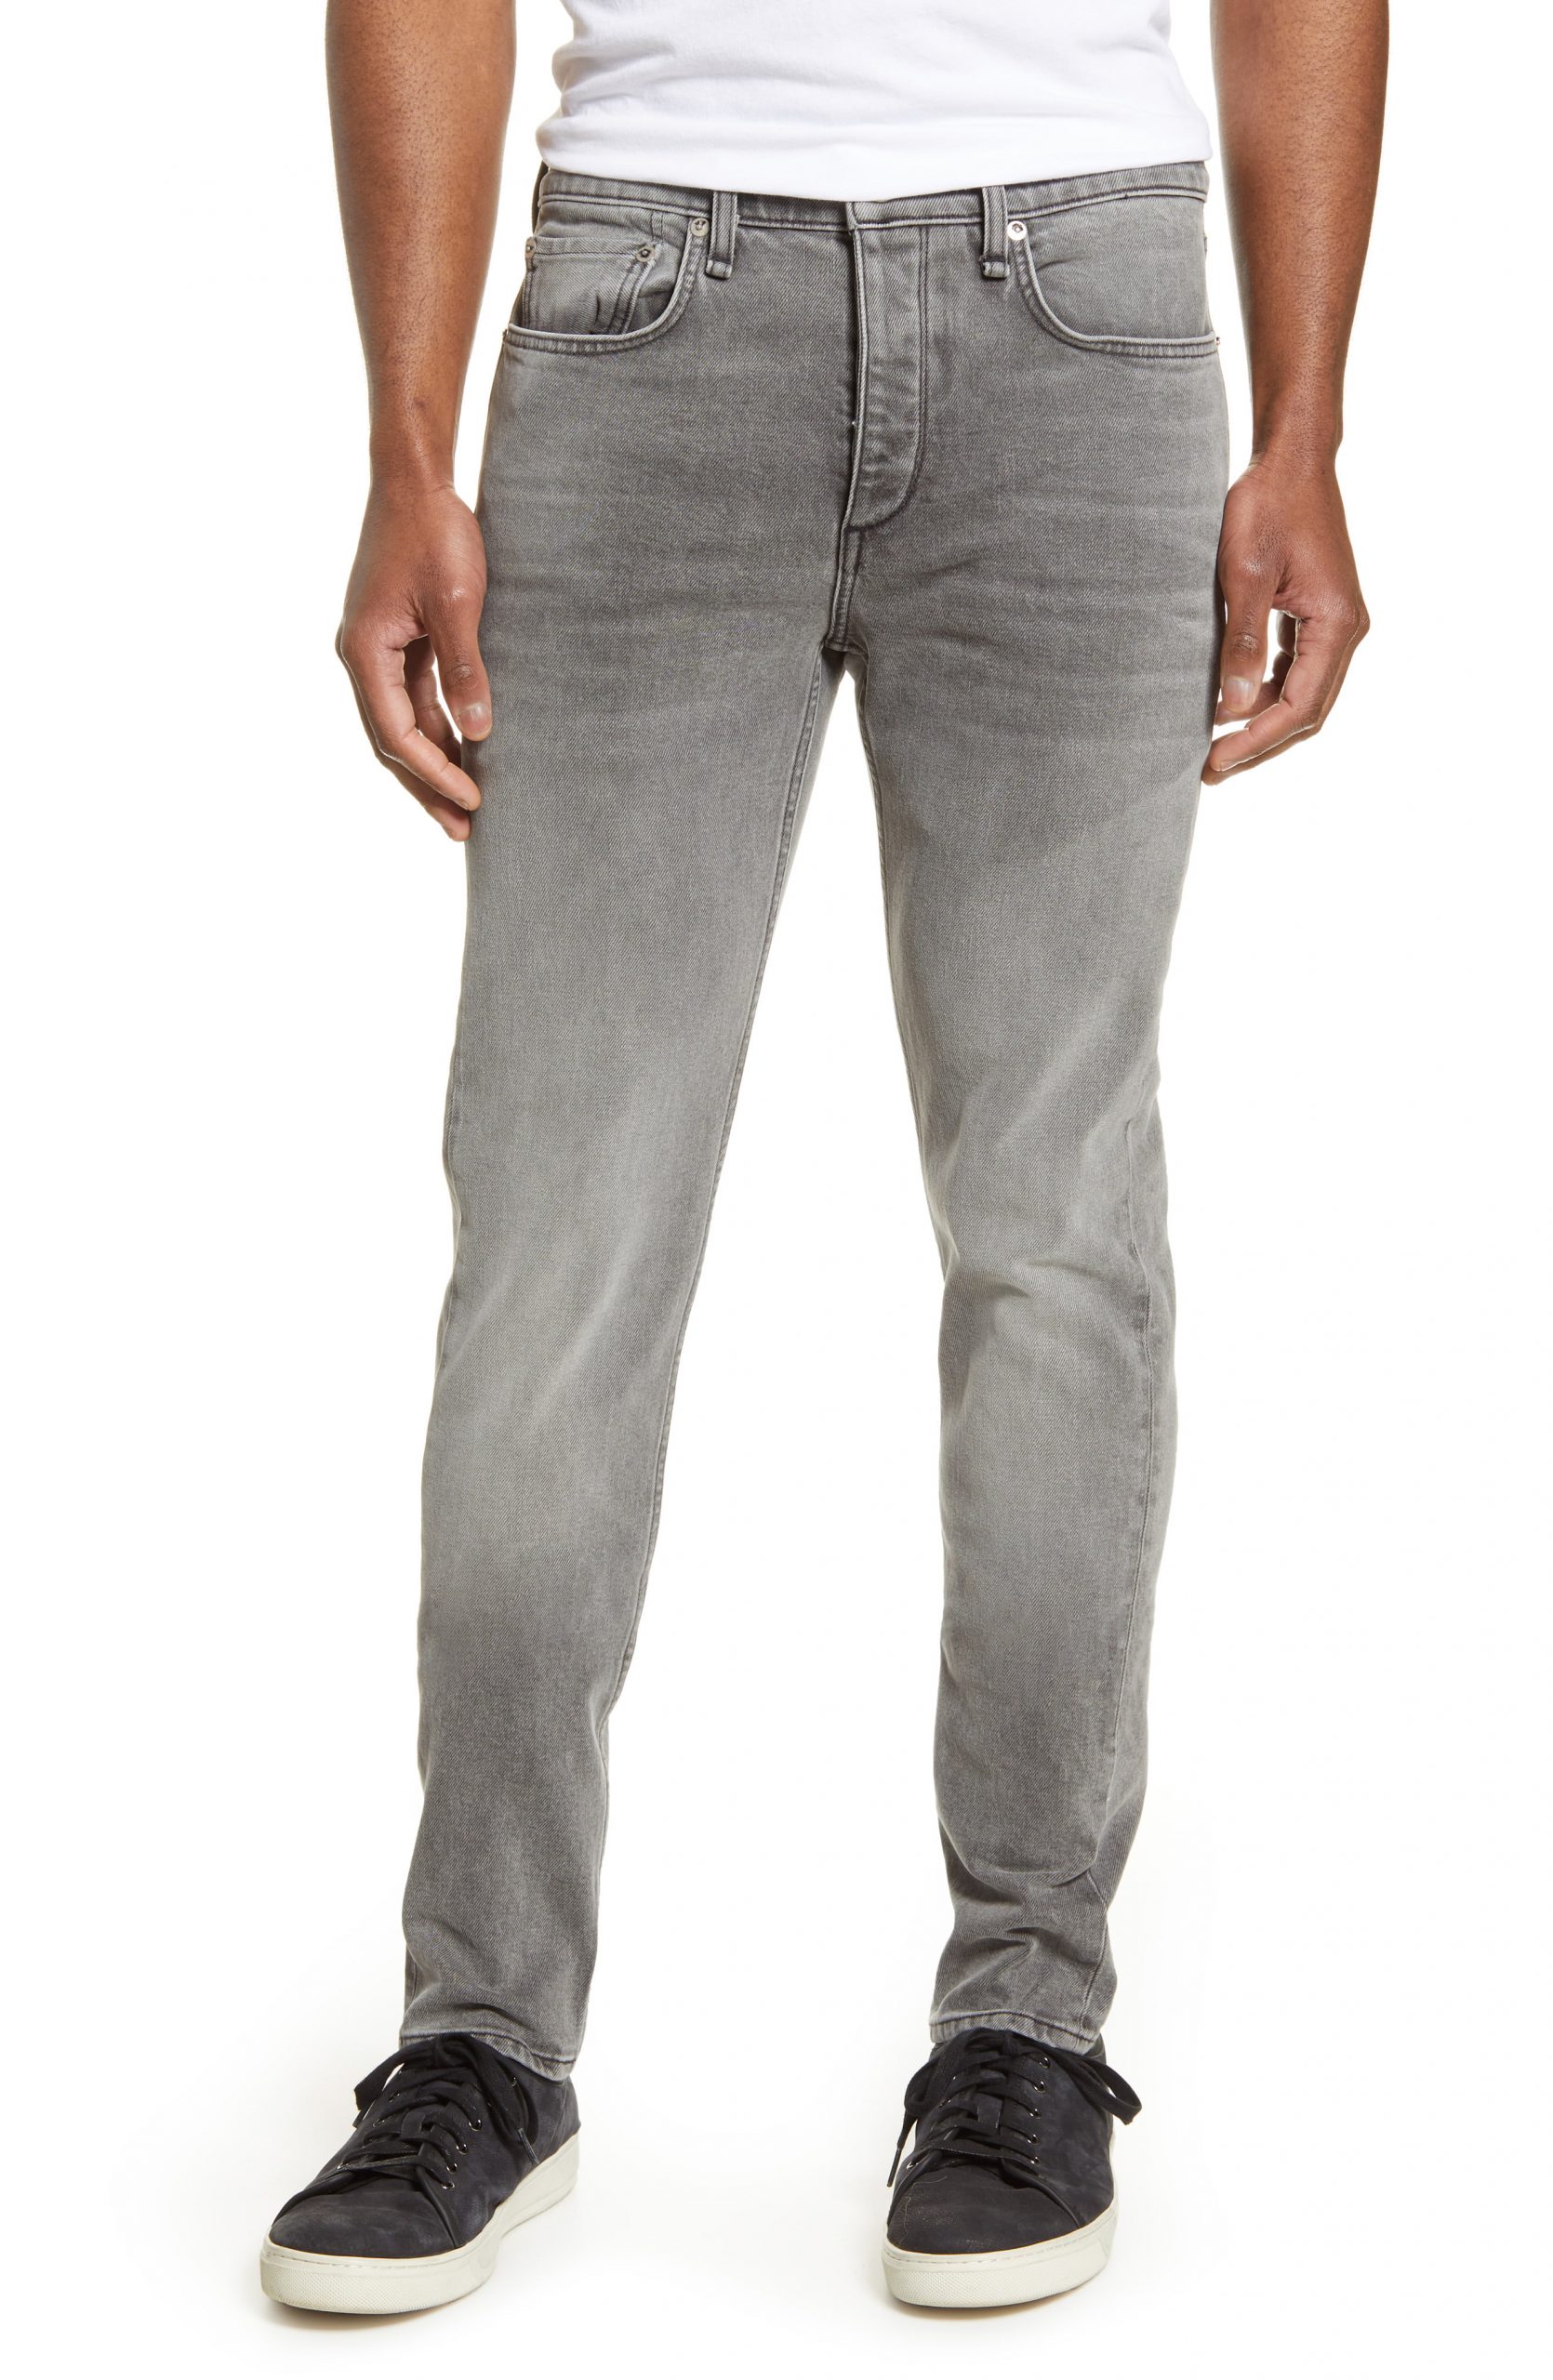 extra long skinny jeans mens